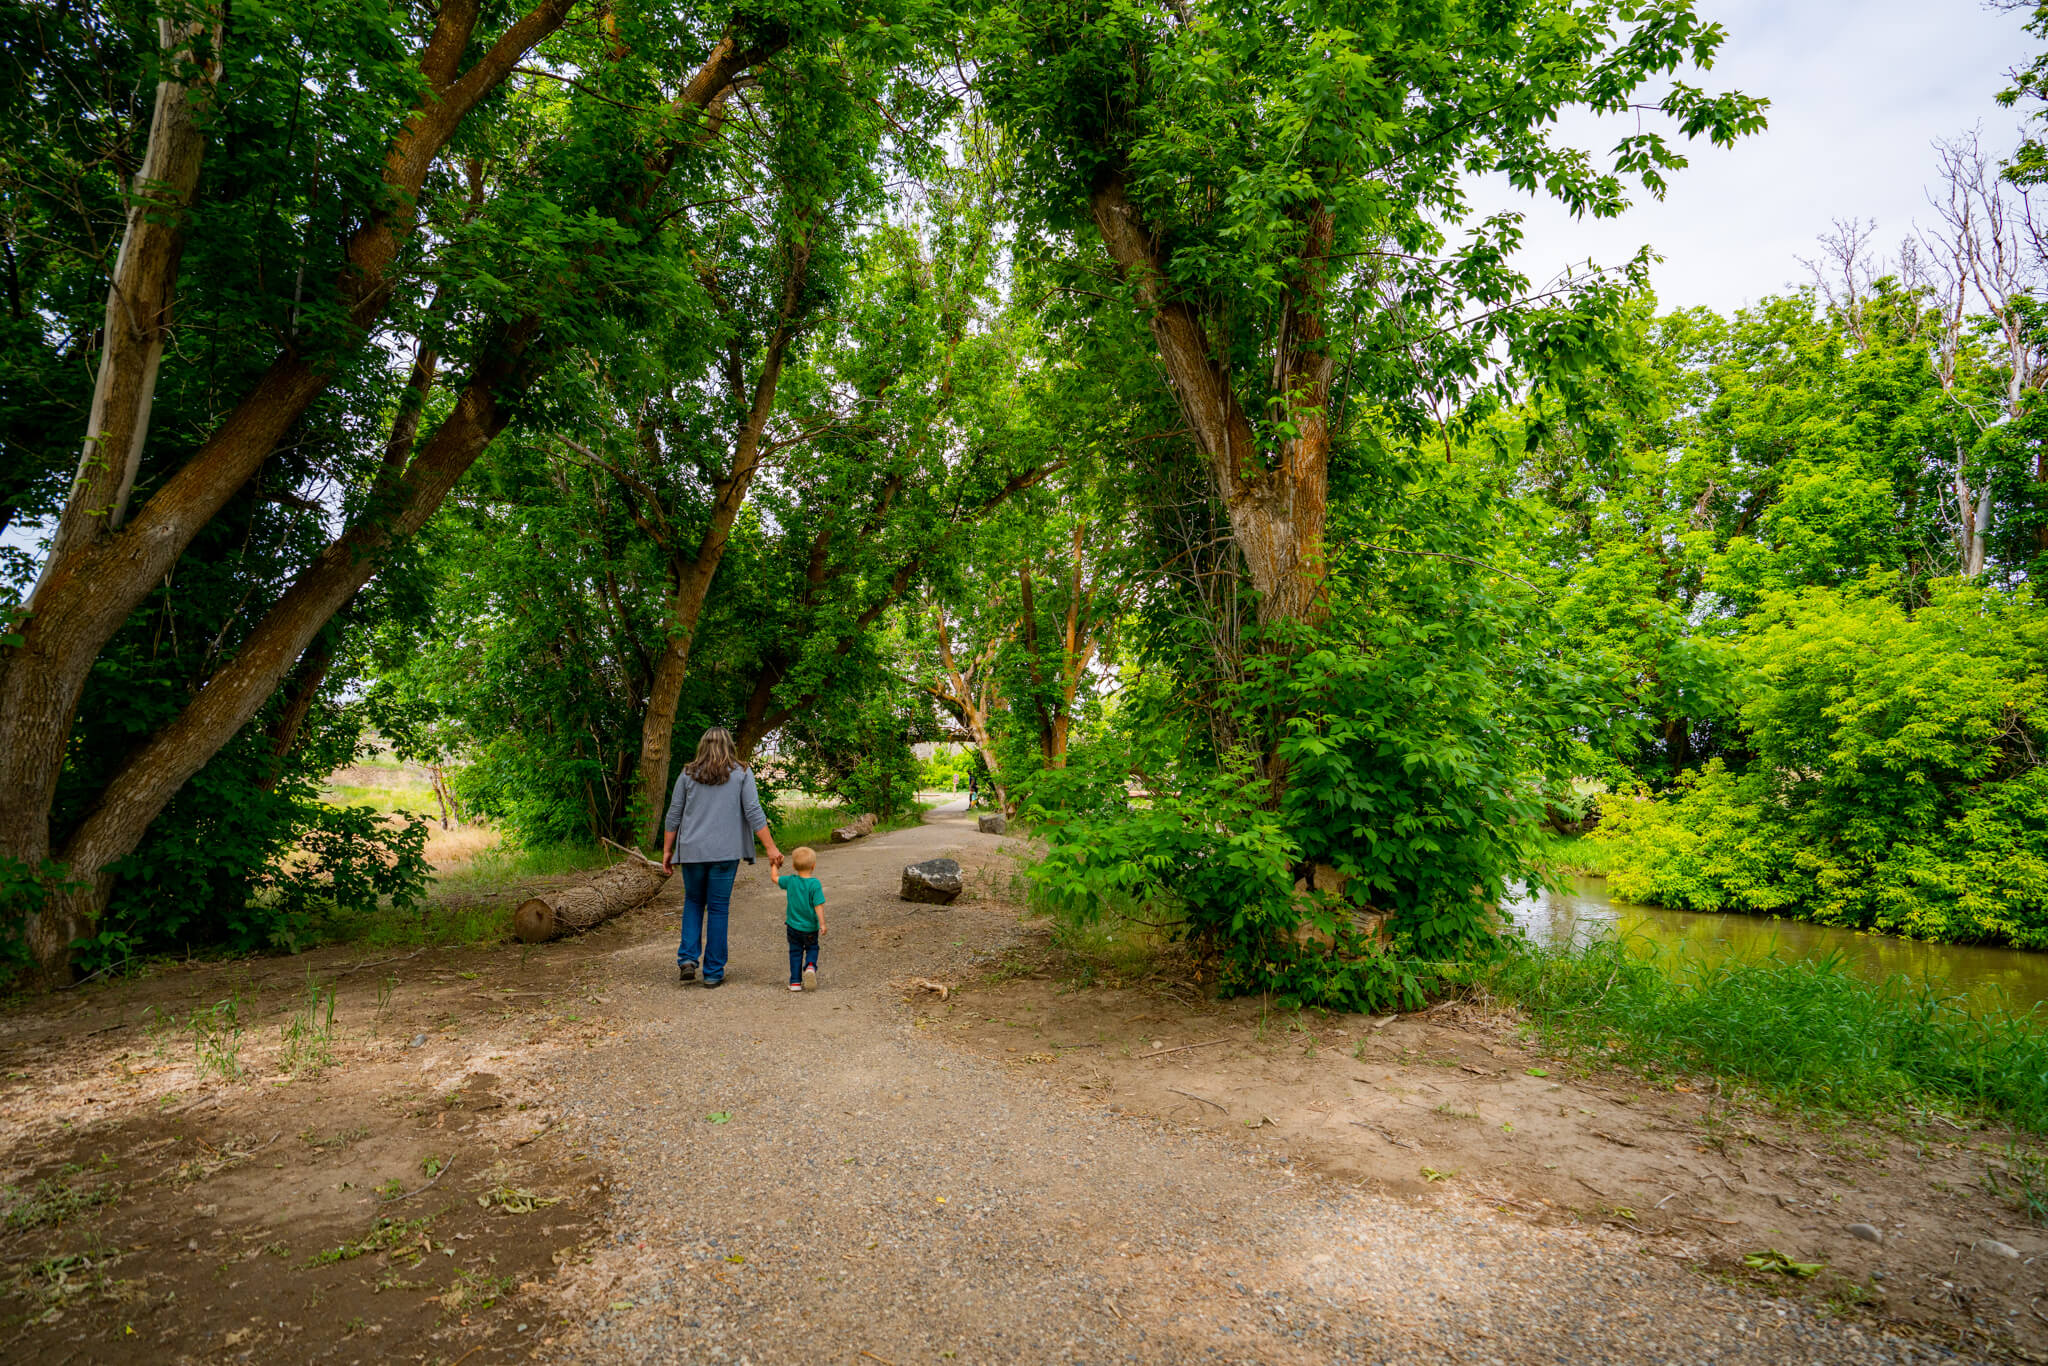 A woman and child walk hand-in-hand together over a path surrounded by green trees.